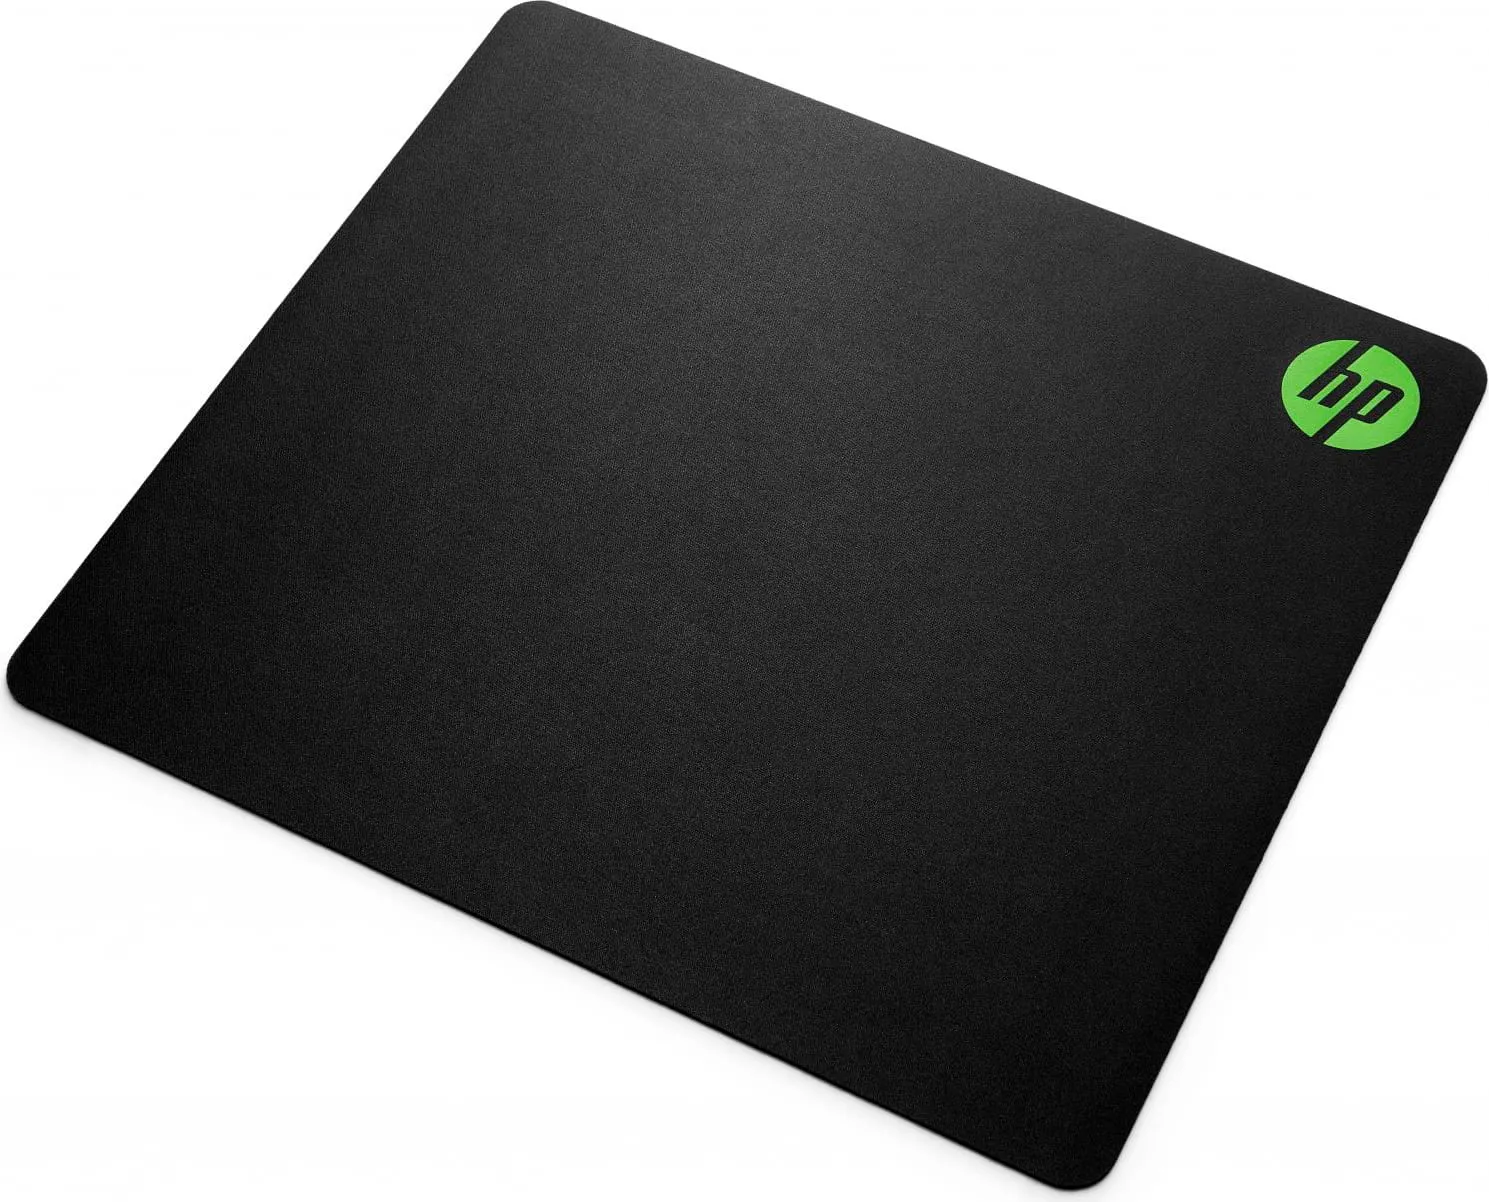 TAPPETINO MOUSE GAMING 400x350 MOUSE PAD 300